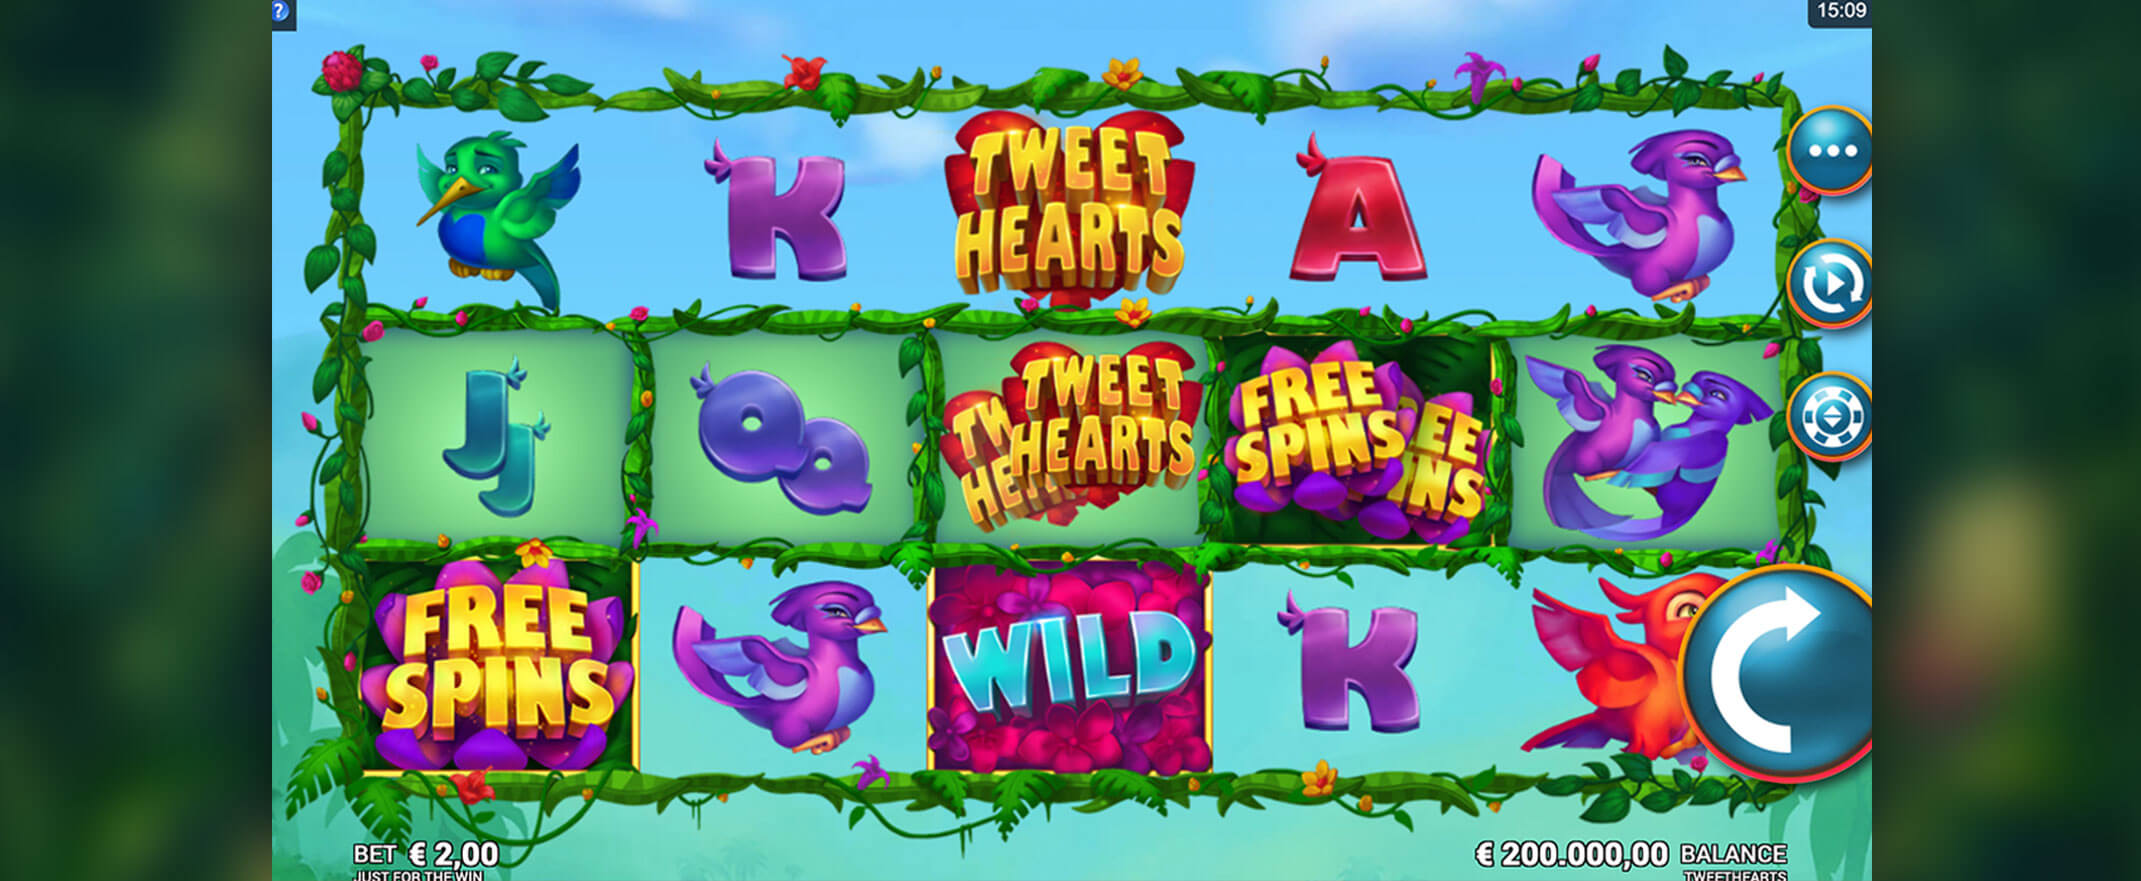 Tweet Hearts slot by JFTW and Microgaming